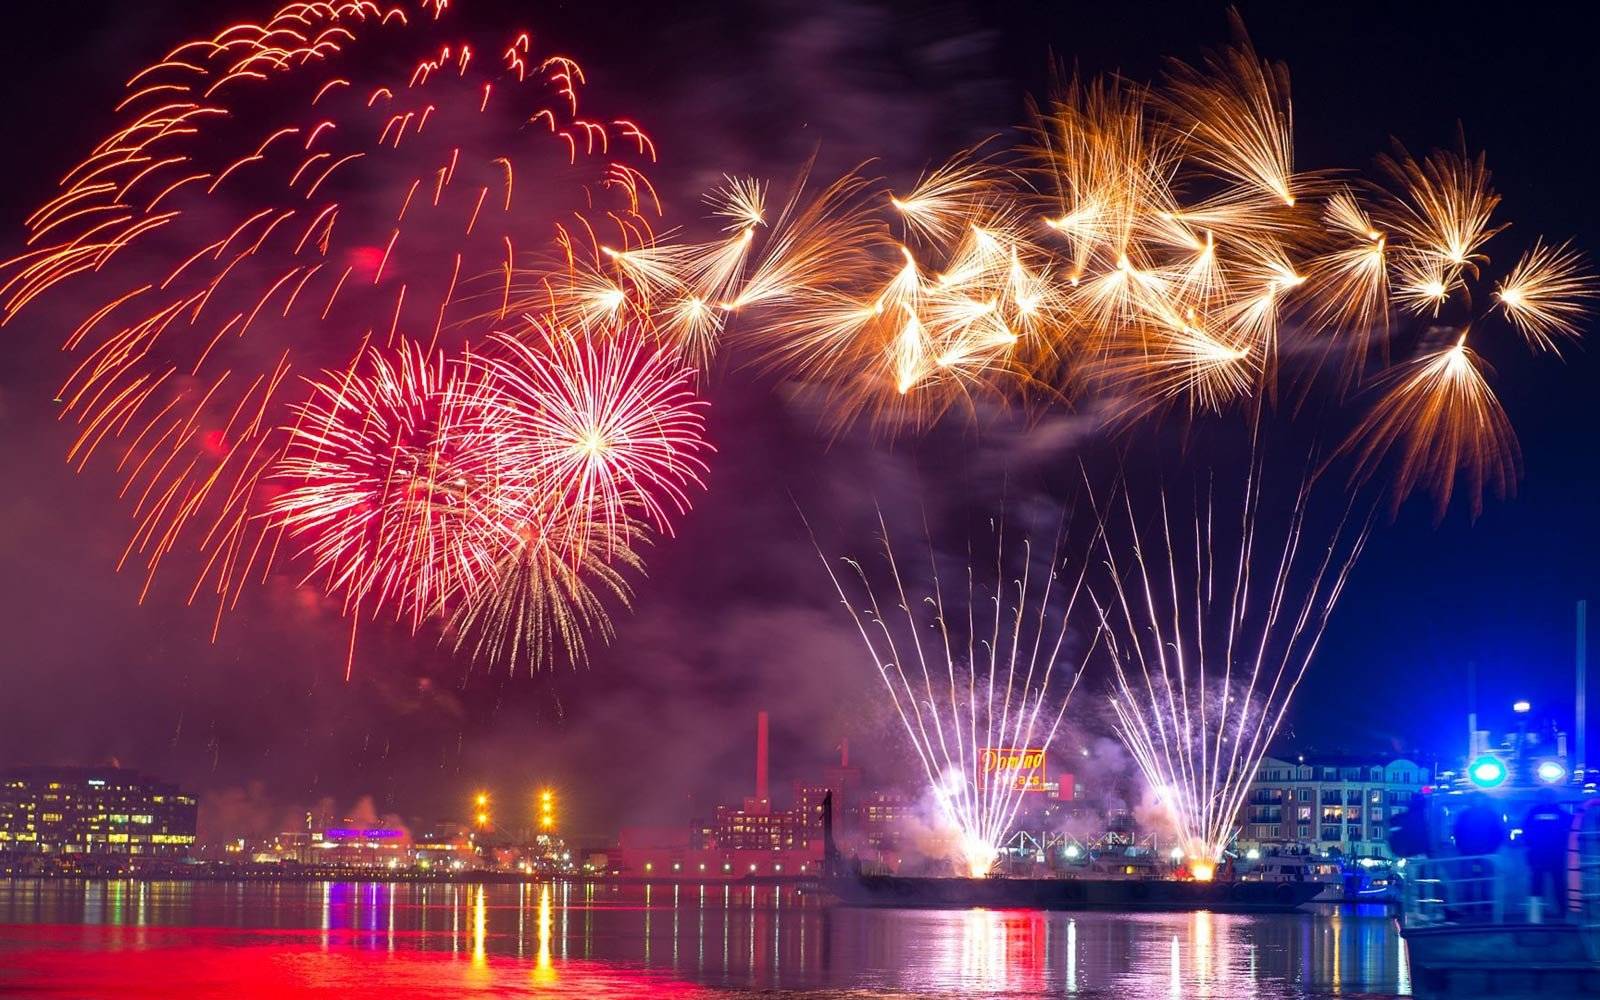 A colorful fireworks display over a body of water.